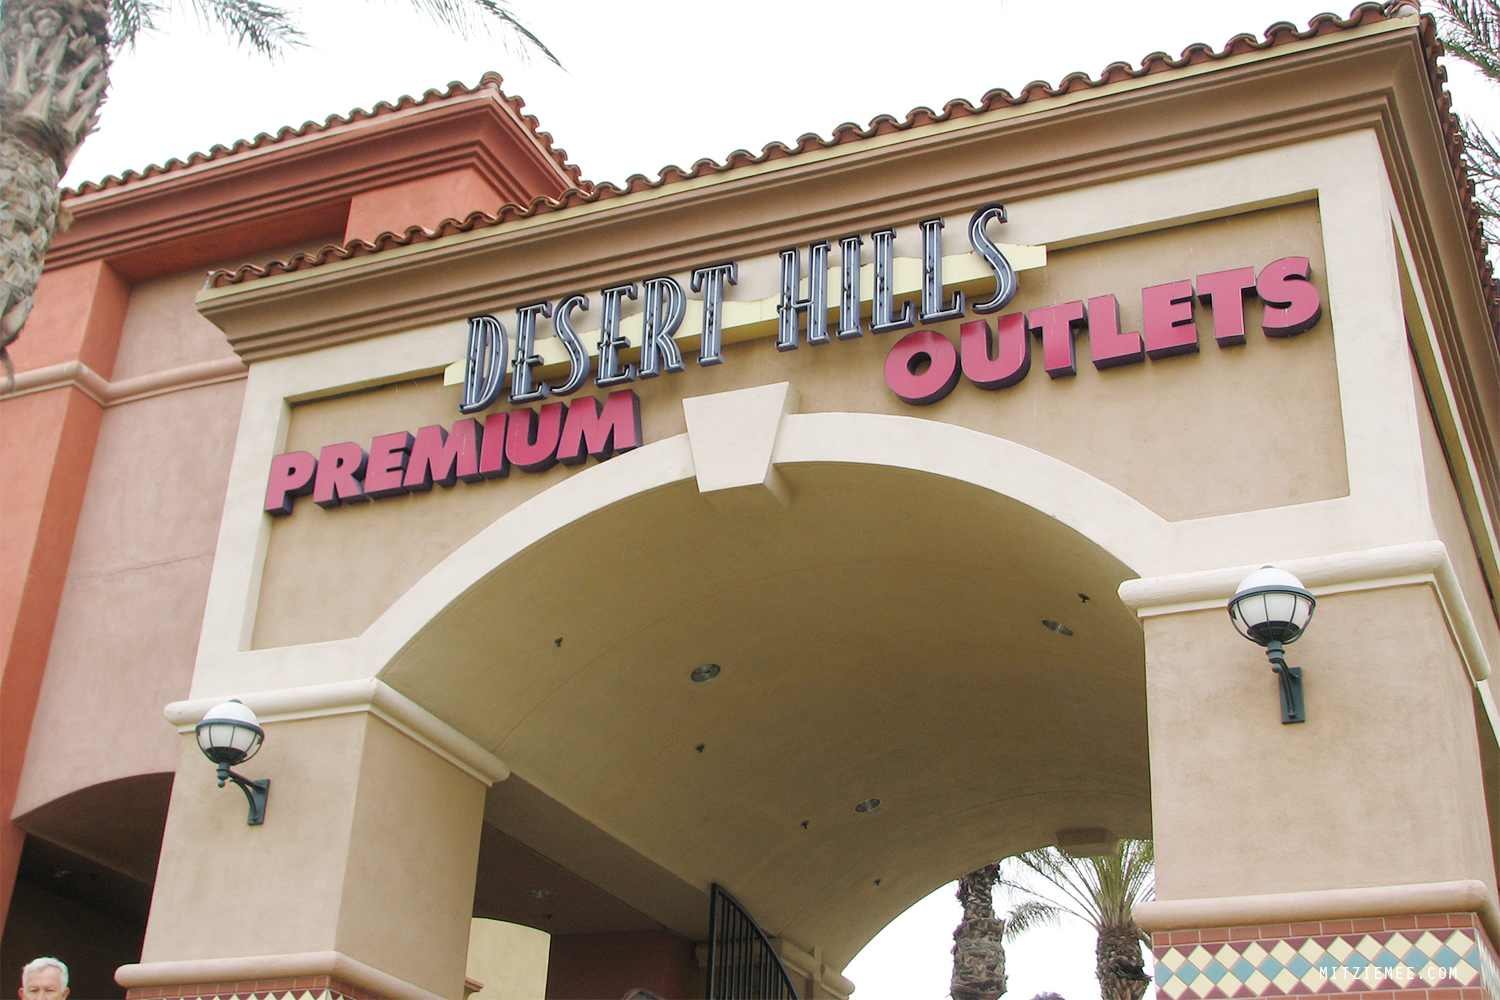 Los Angeles Blog: A shopping trip to Desert Hills Premium Outlets - Los Angeles Blog | Mitzie Mee